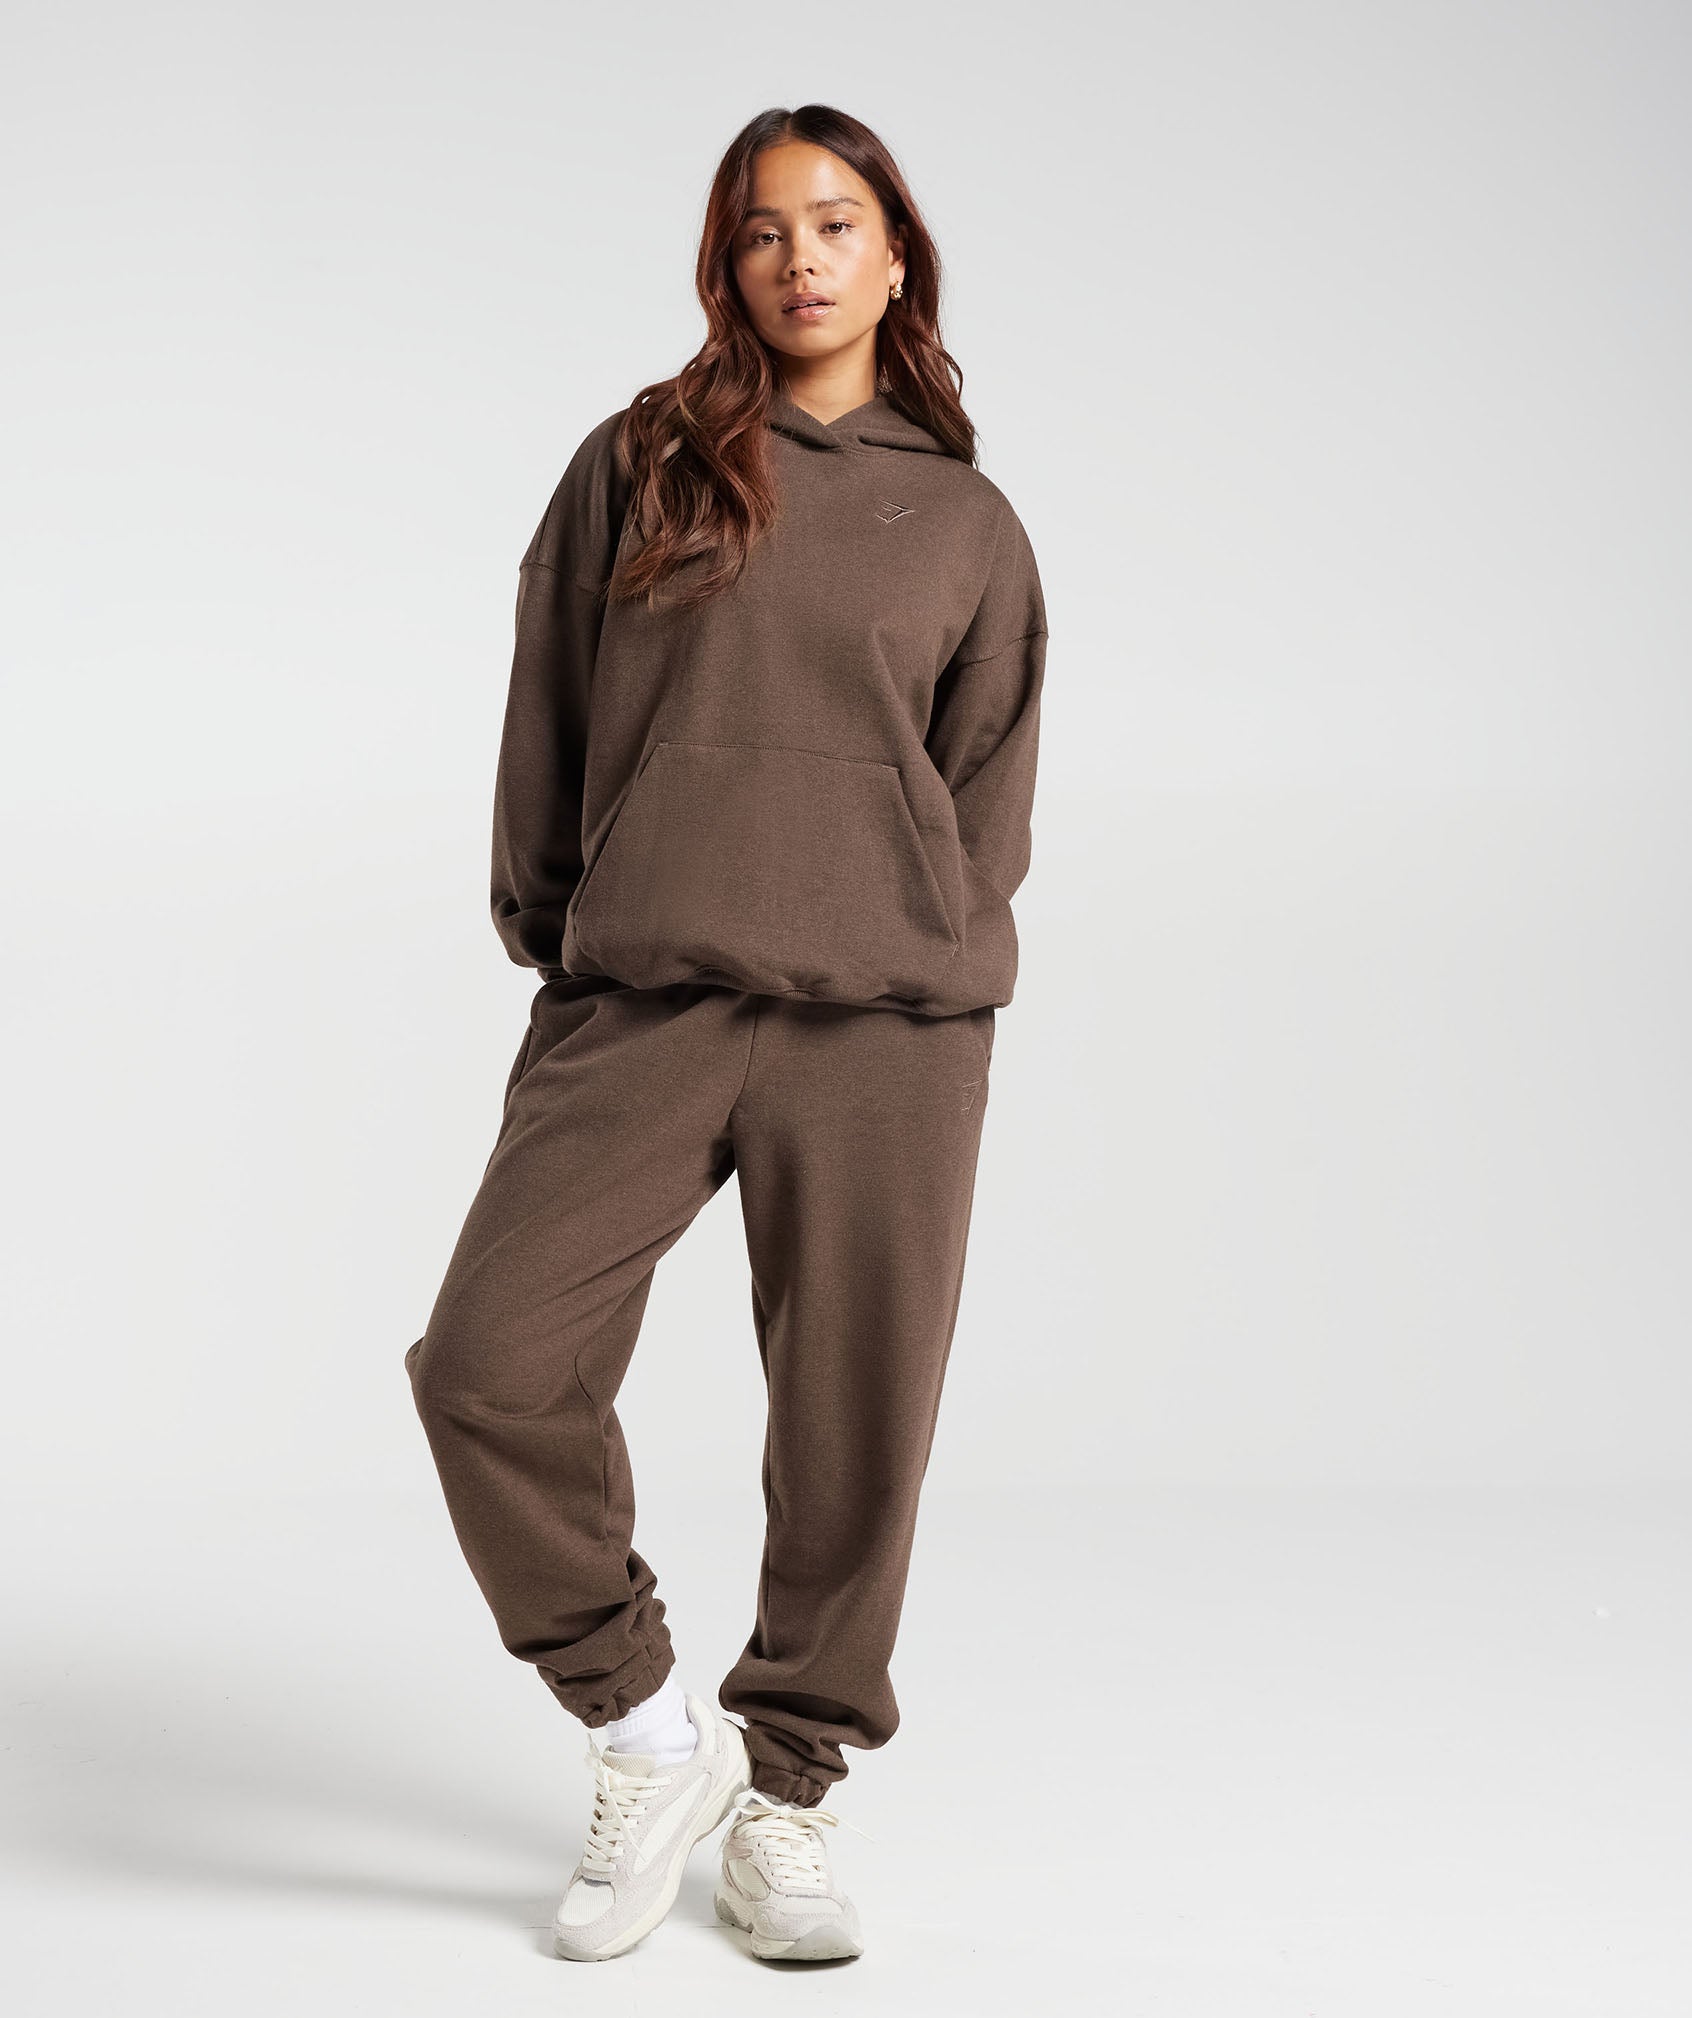 Rest Day Sweats Hoodie in Cozy Brown Marl - view 5